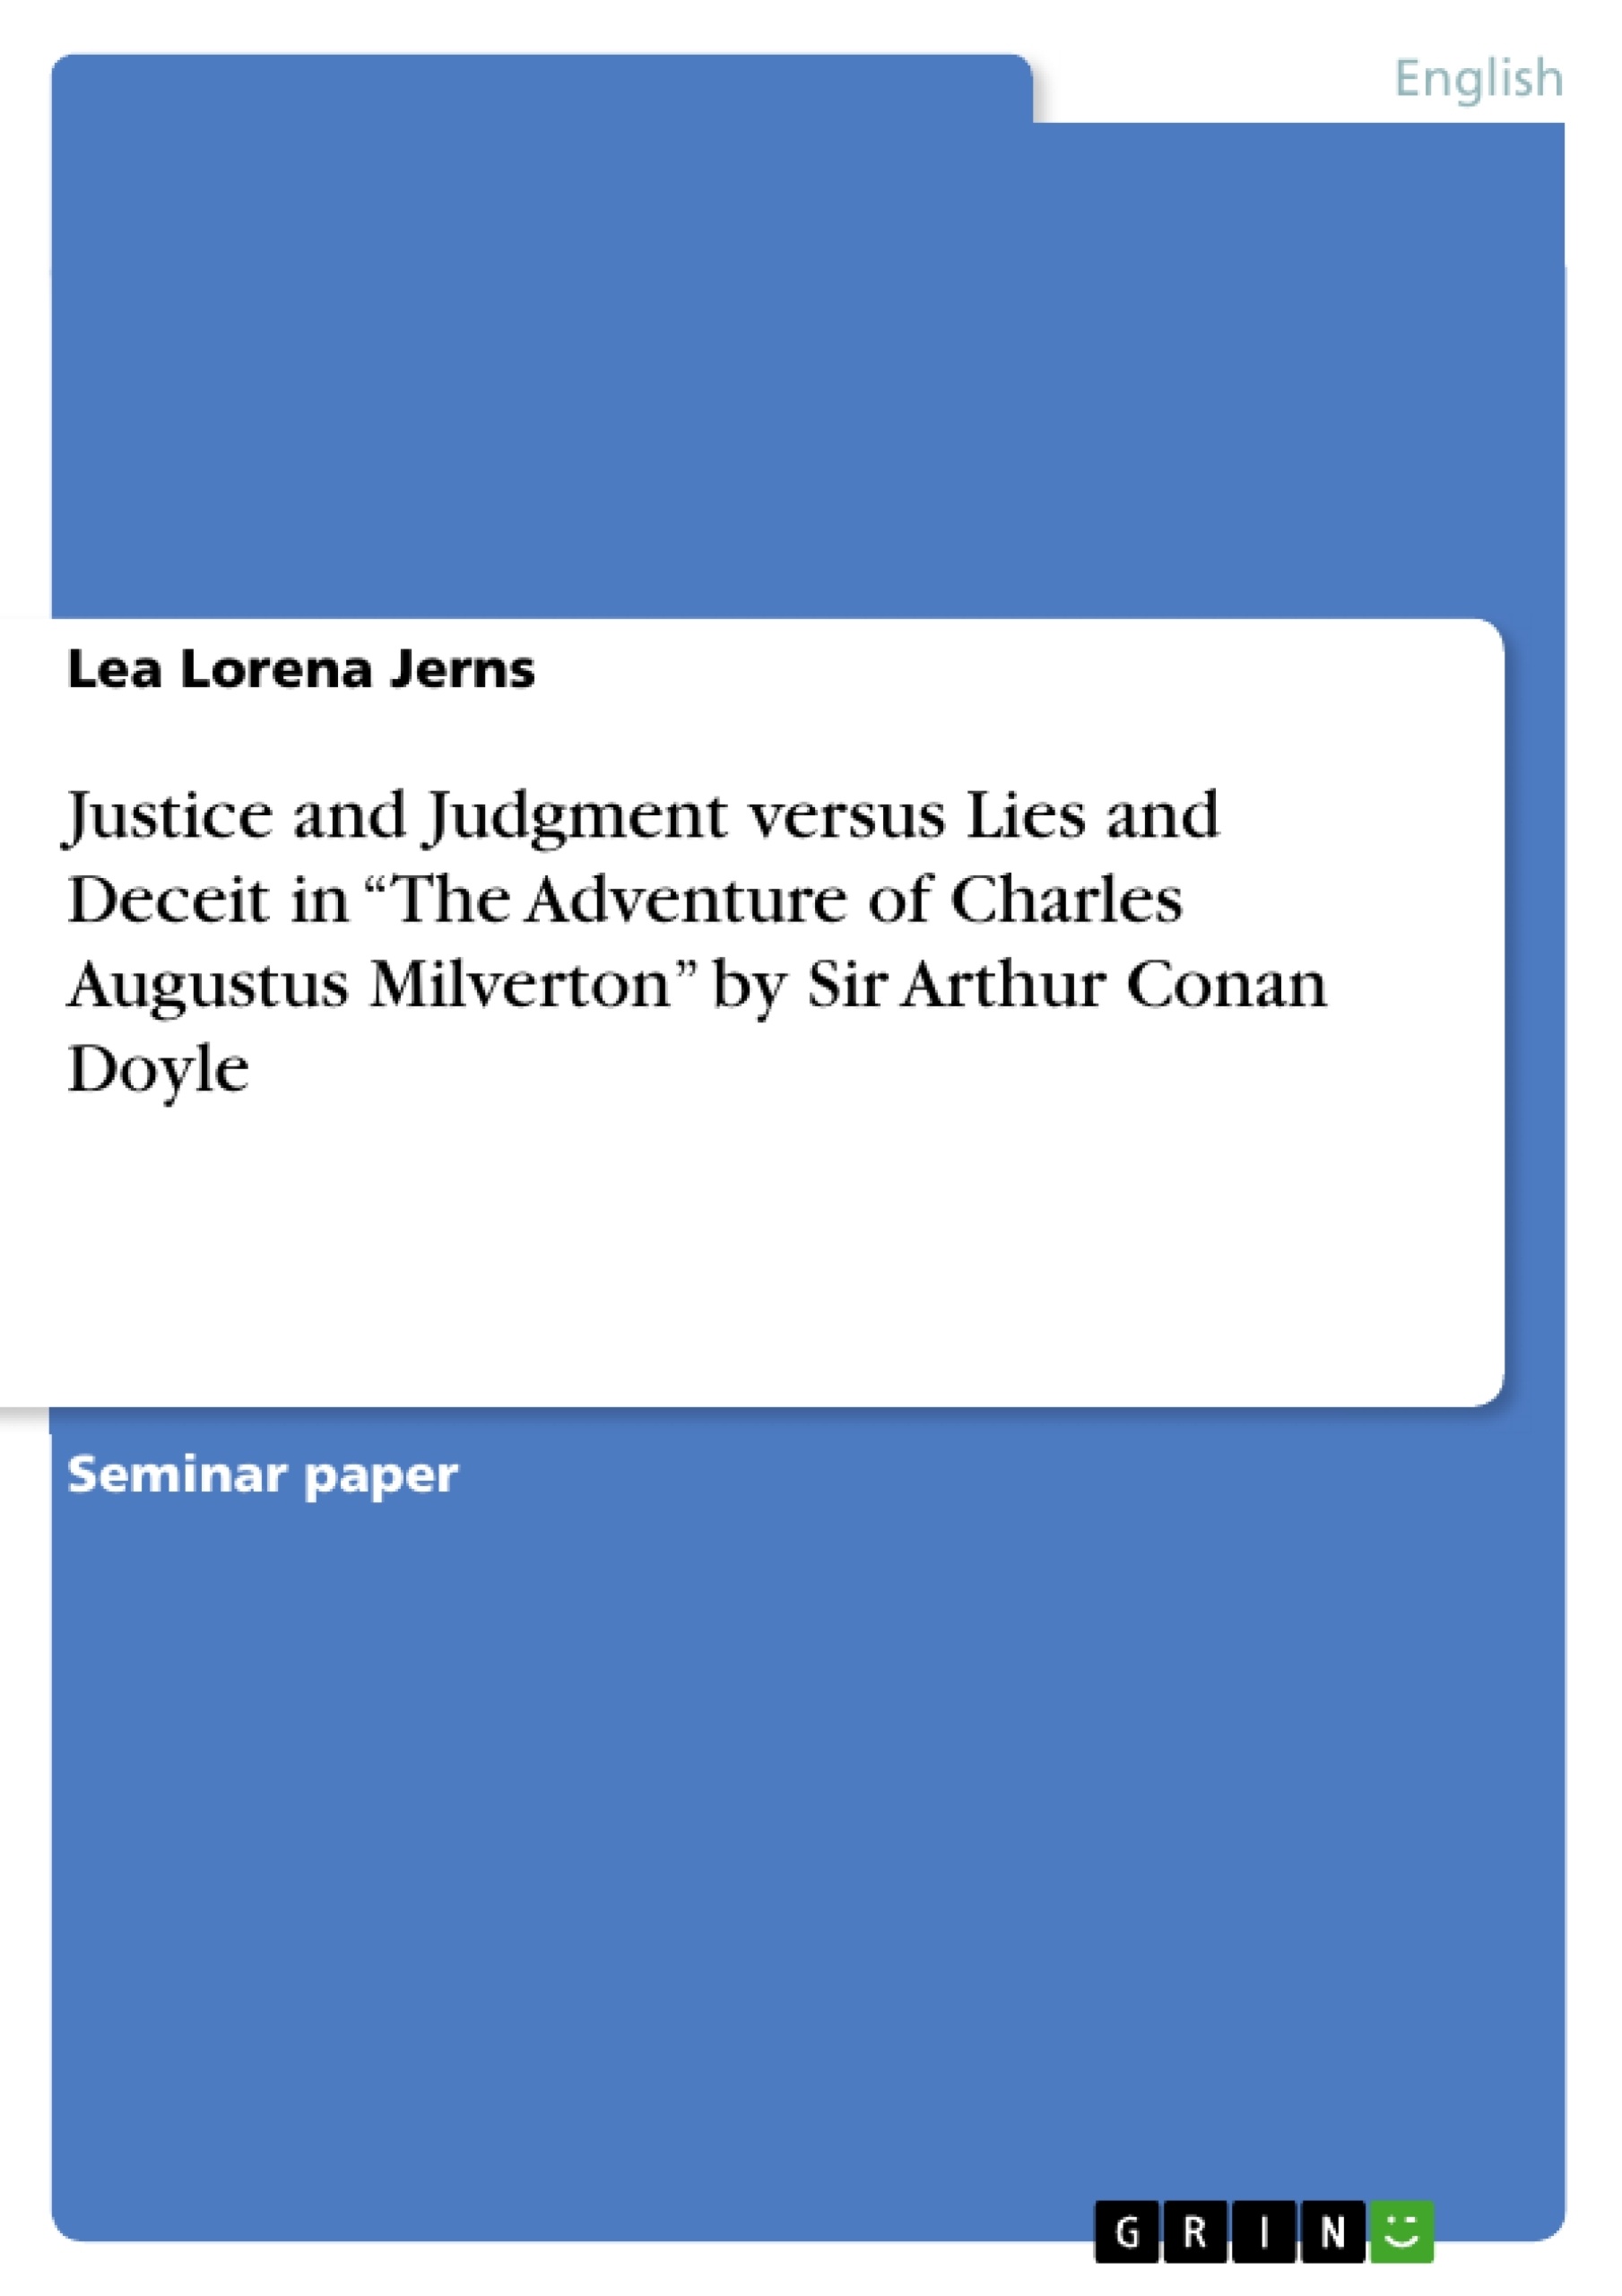 Title: Justice and Judgment versus Lies and Deceit in “The Adventure of Charles Augustus Milverton” by Sir Arthur Conan Doyle